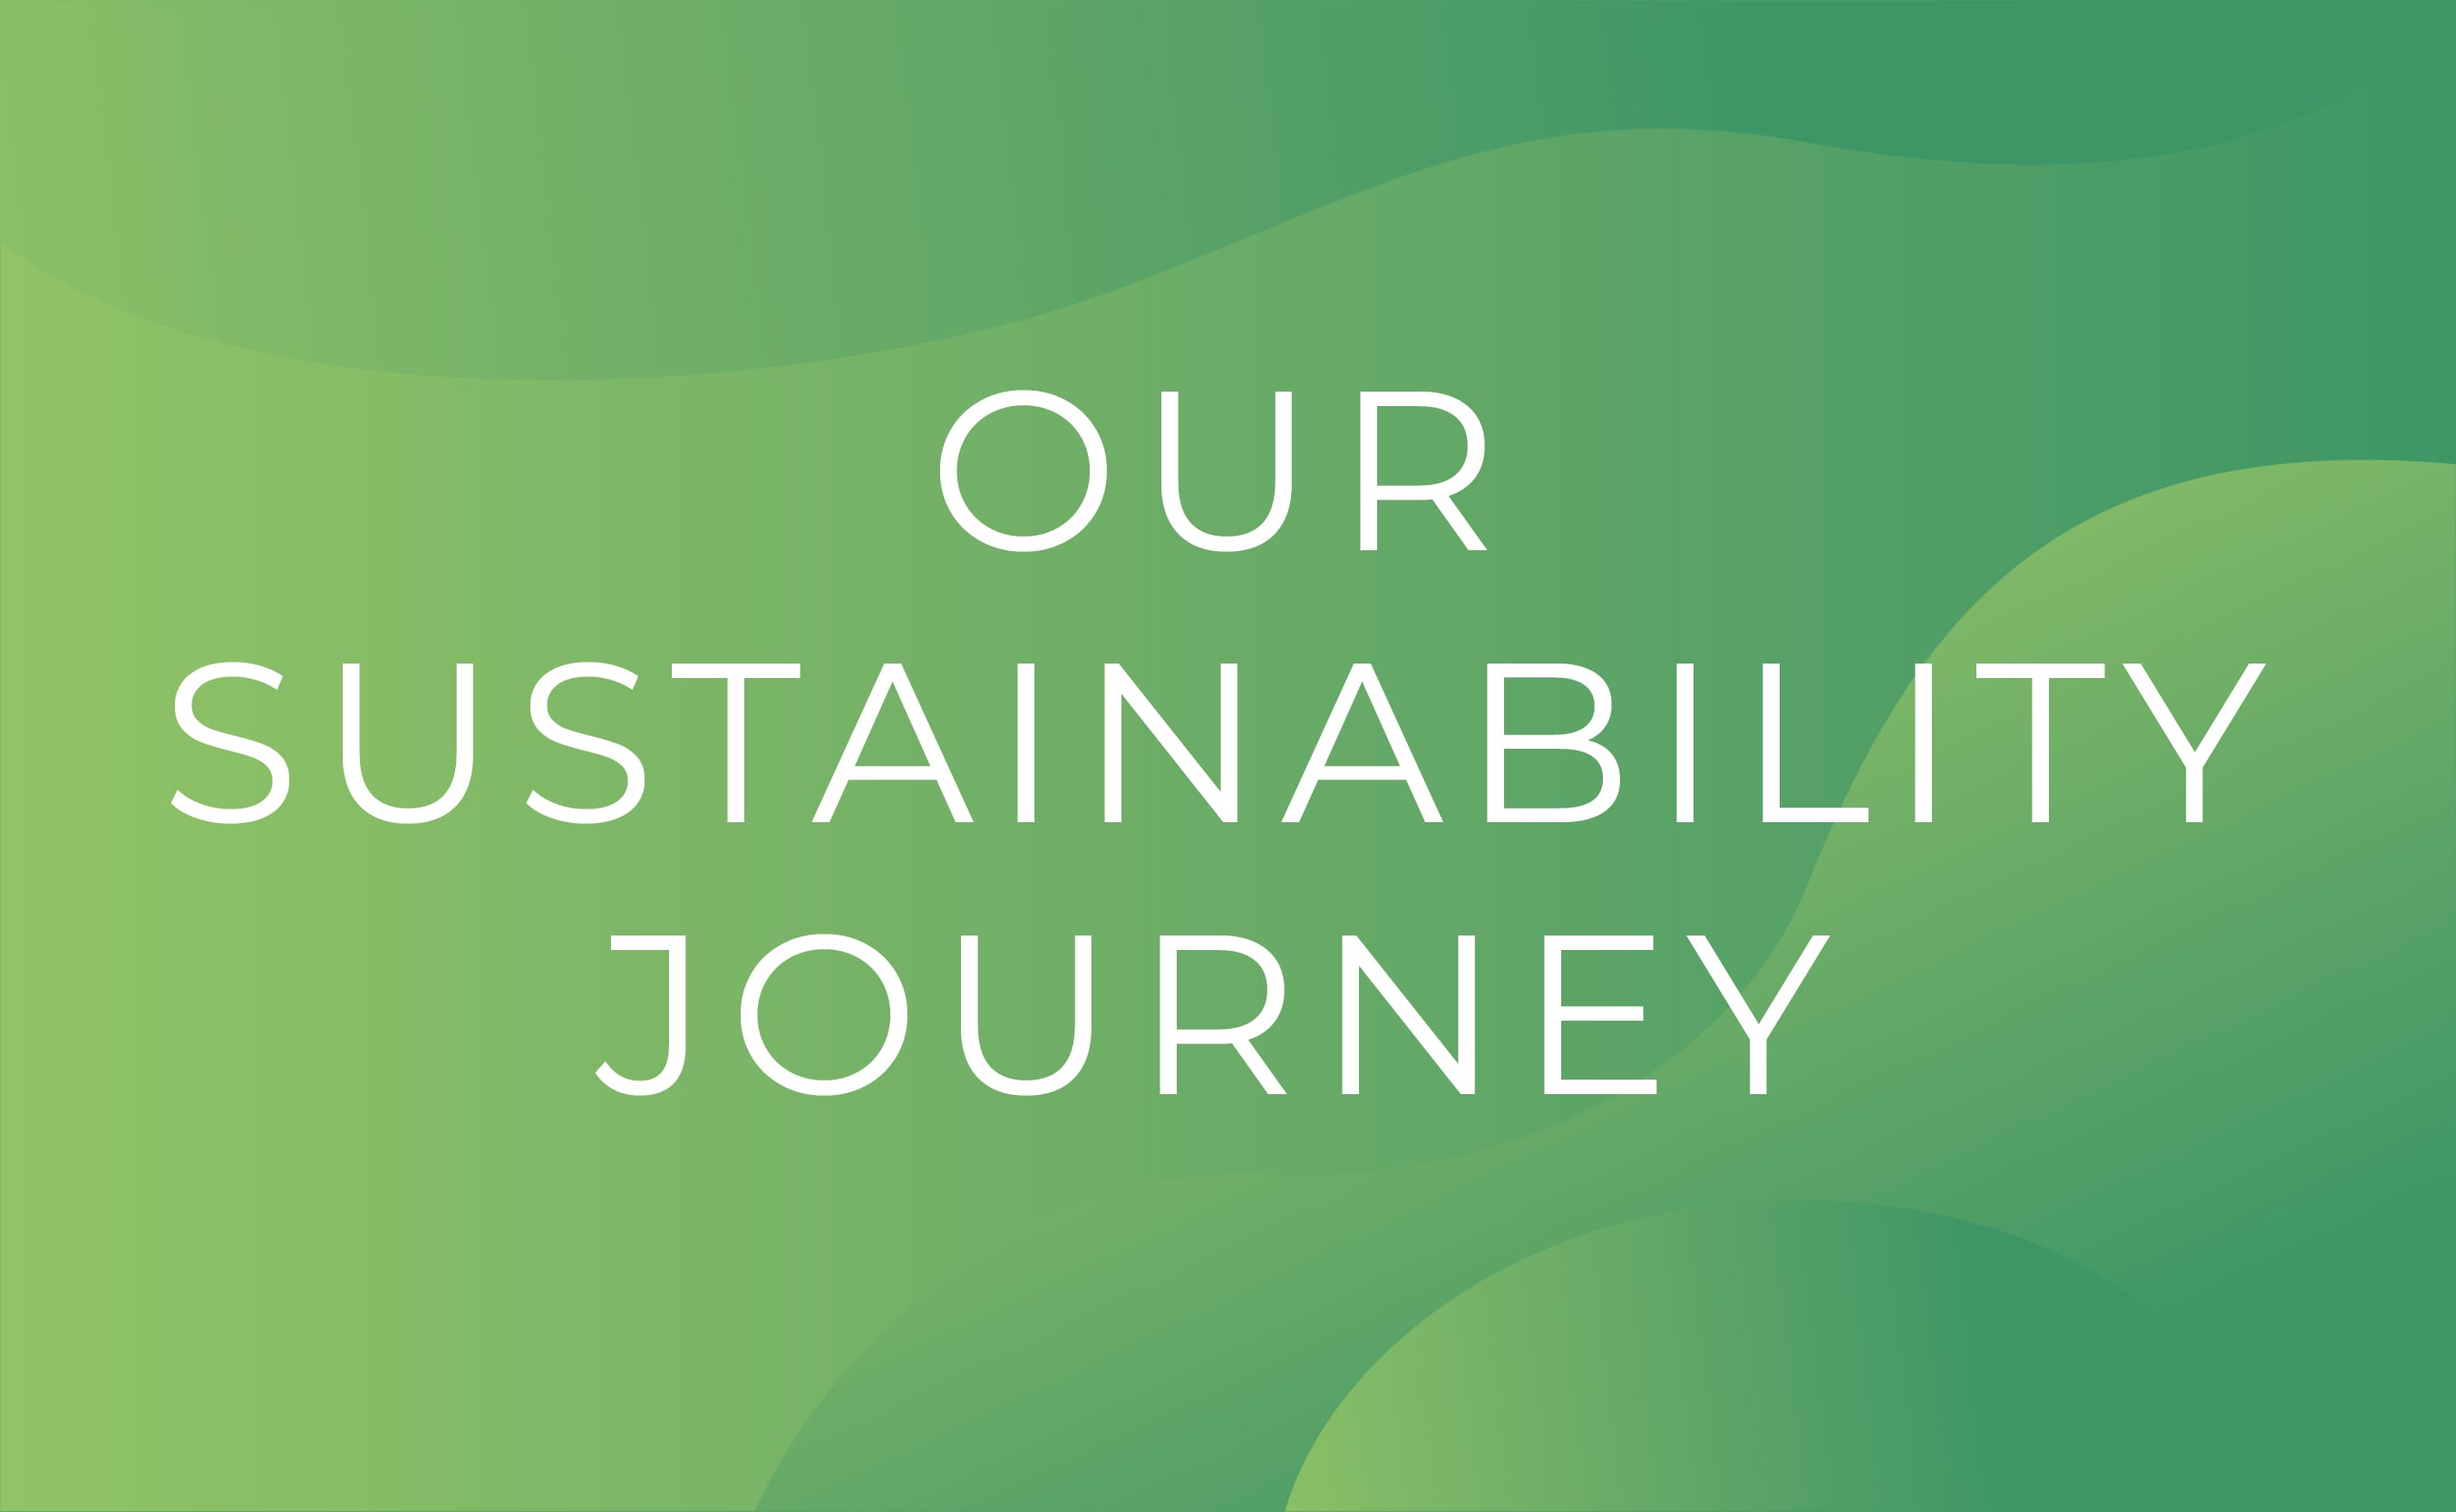 Our_Sustainability_Journey-03-min.jpg